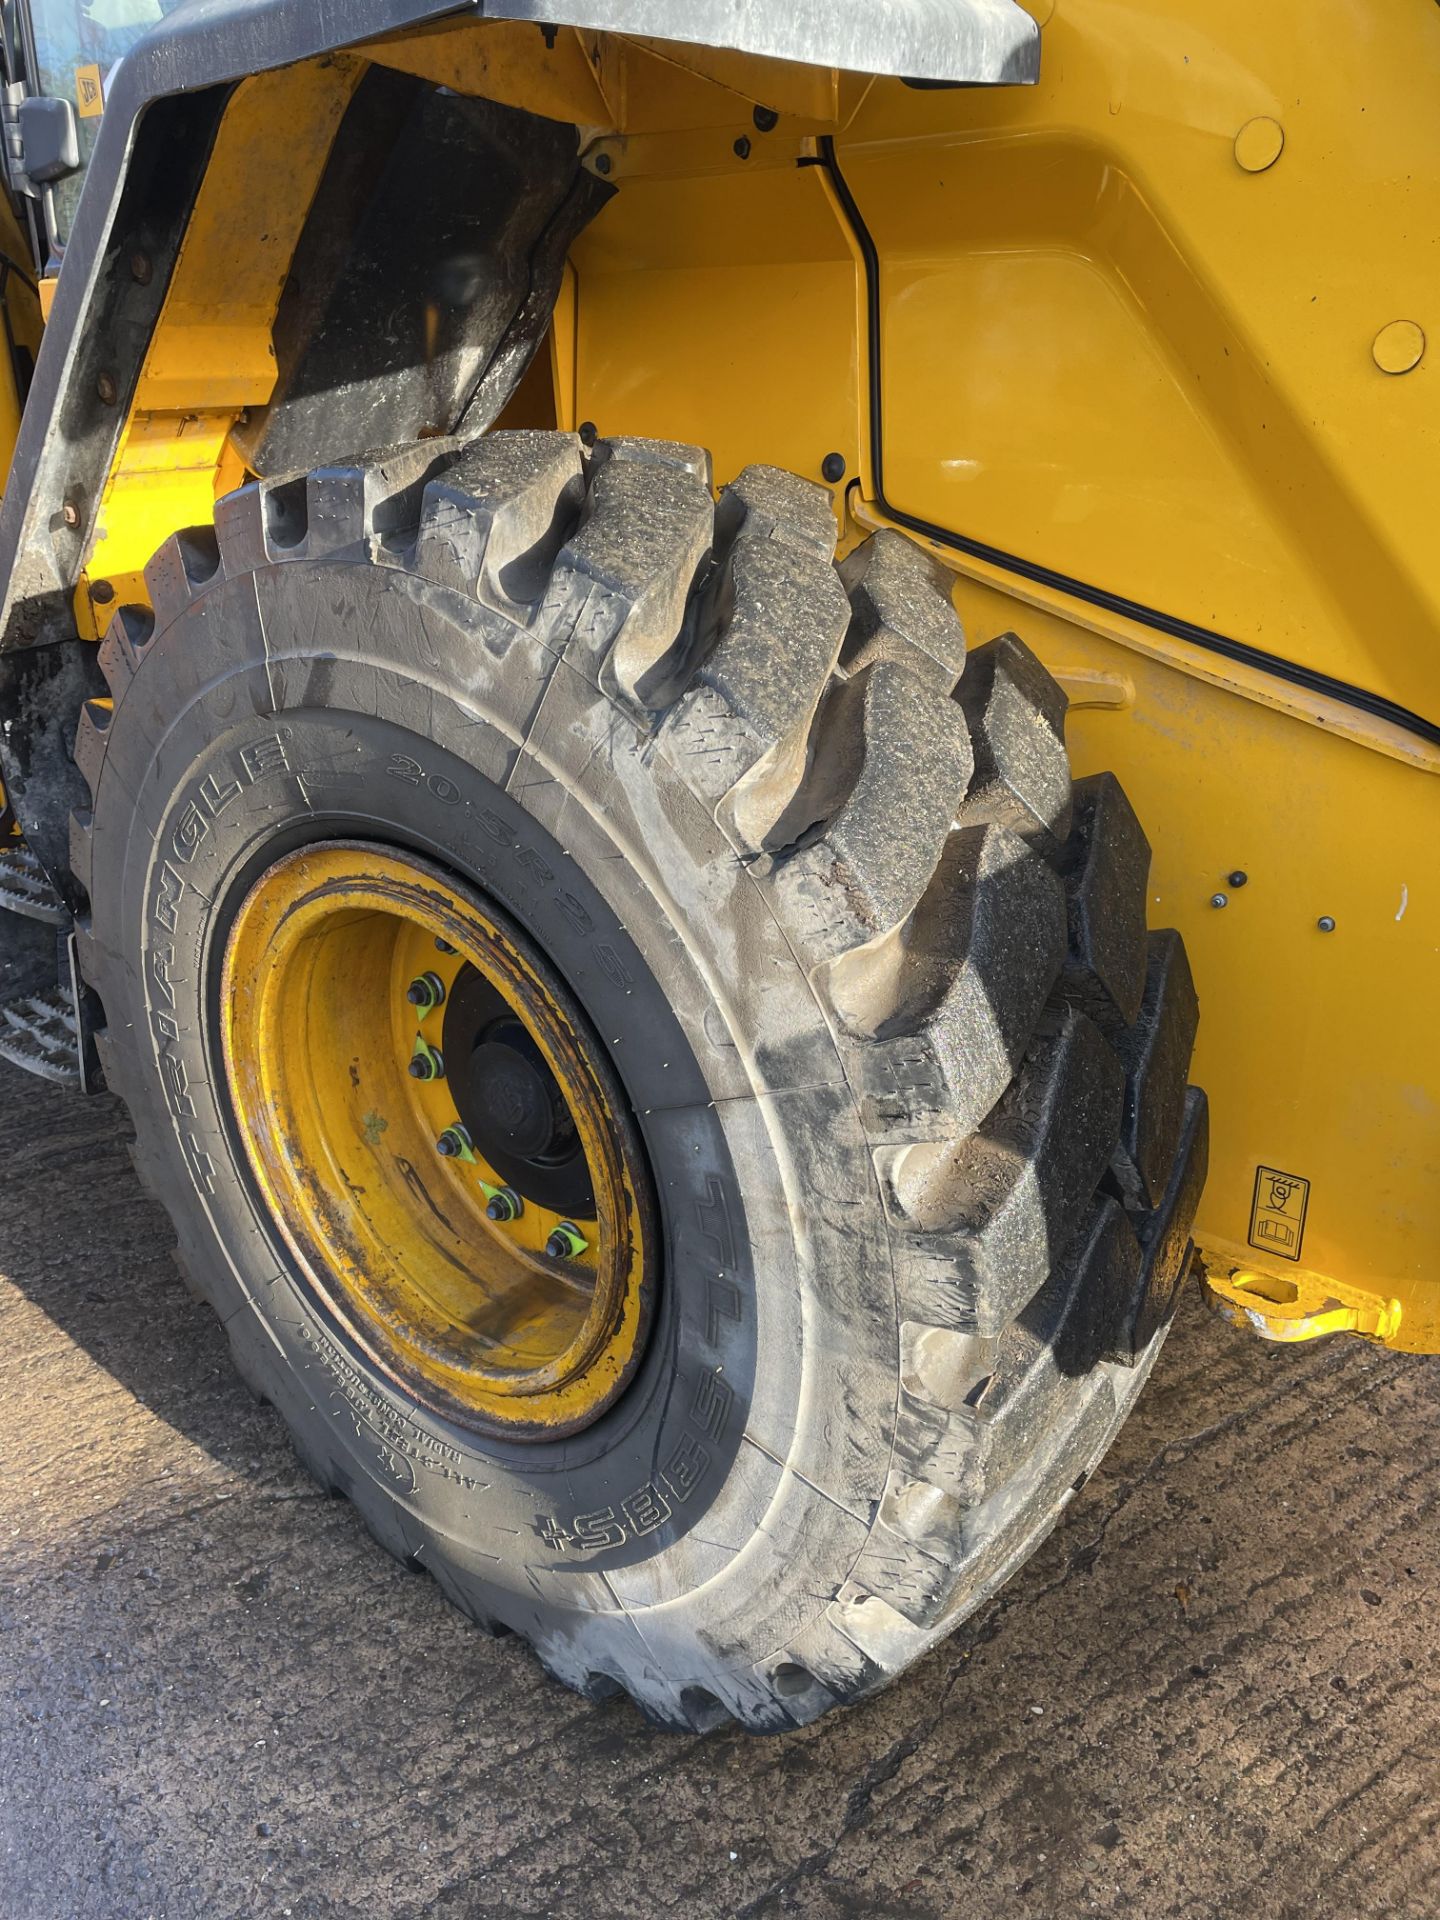 JCB, Wastemaster 427 S5, wheel loader, PIN: JCB4A5A9VK2679908 (2019), Last known Hours 3775.8, - Image 5 of 24